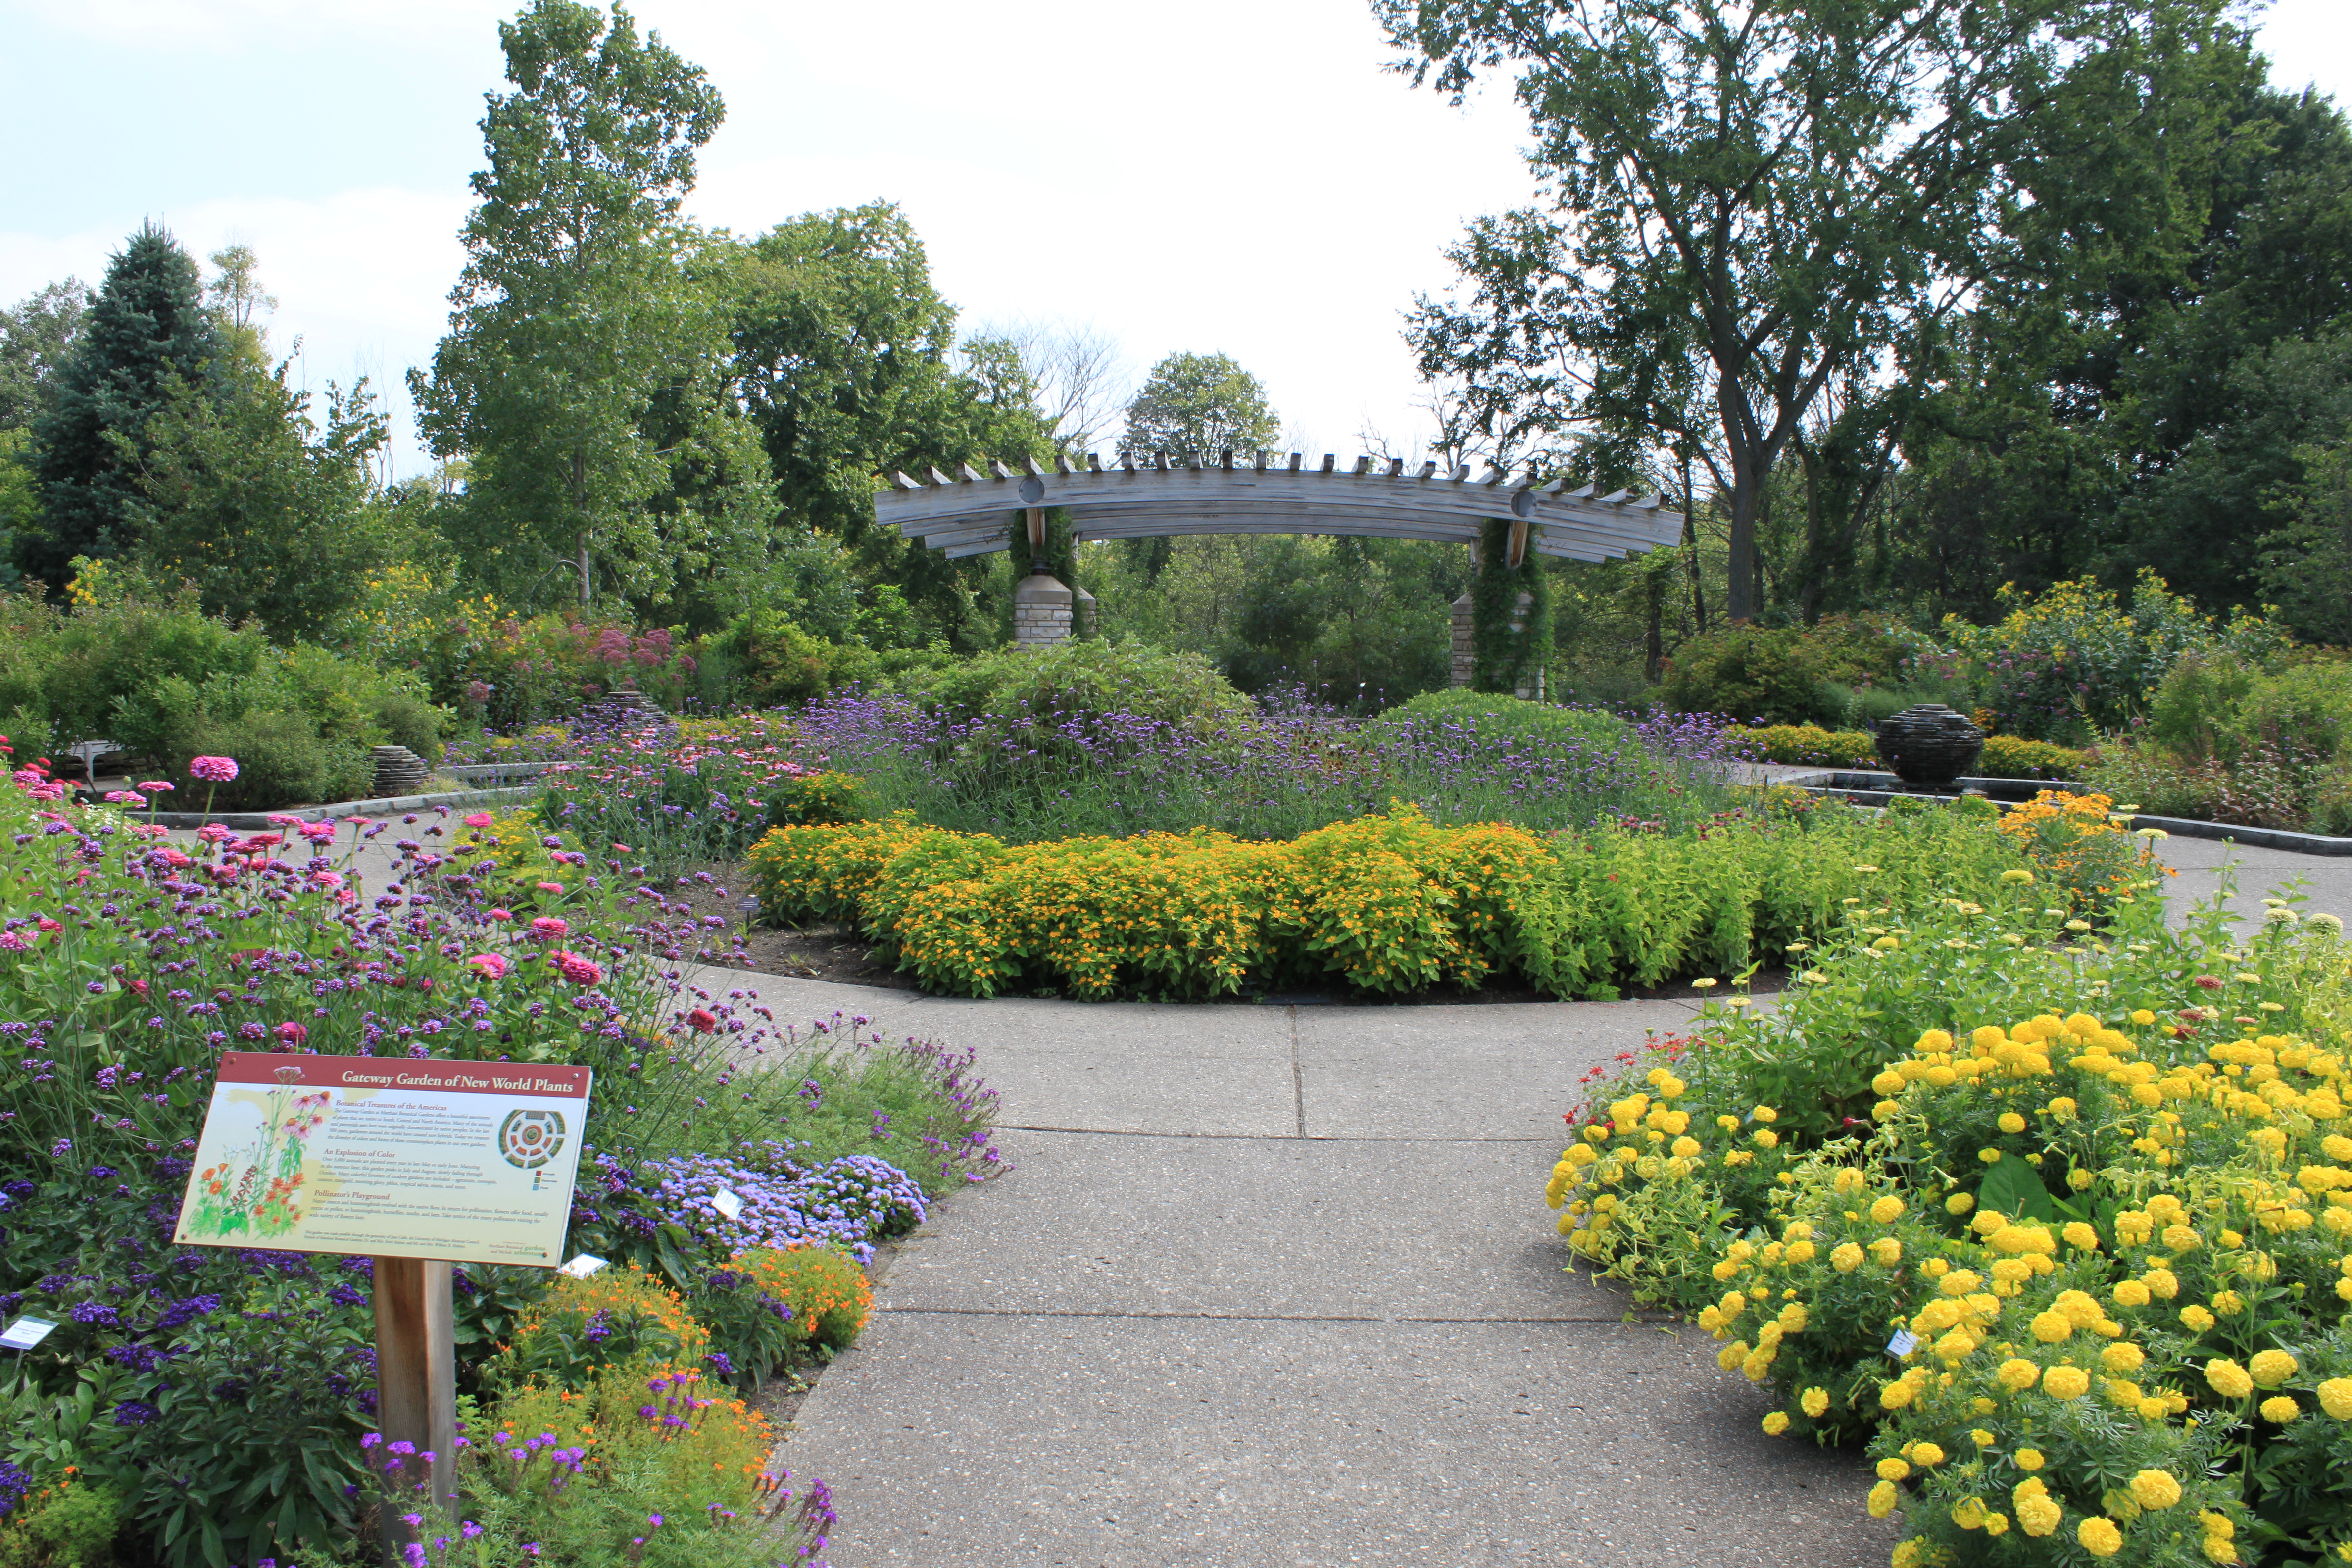 Gateway garden at Matthaei Botanical Gardens filled iwth yellow and purple flowers and a pergola in the center